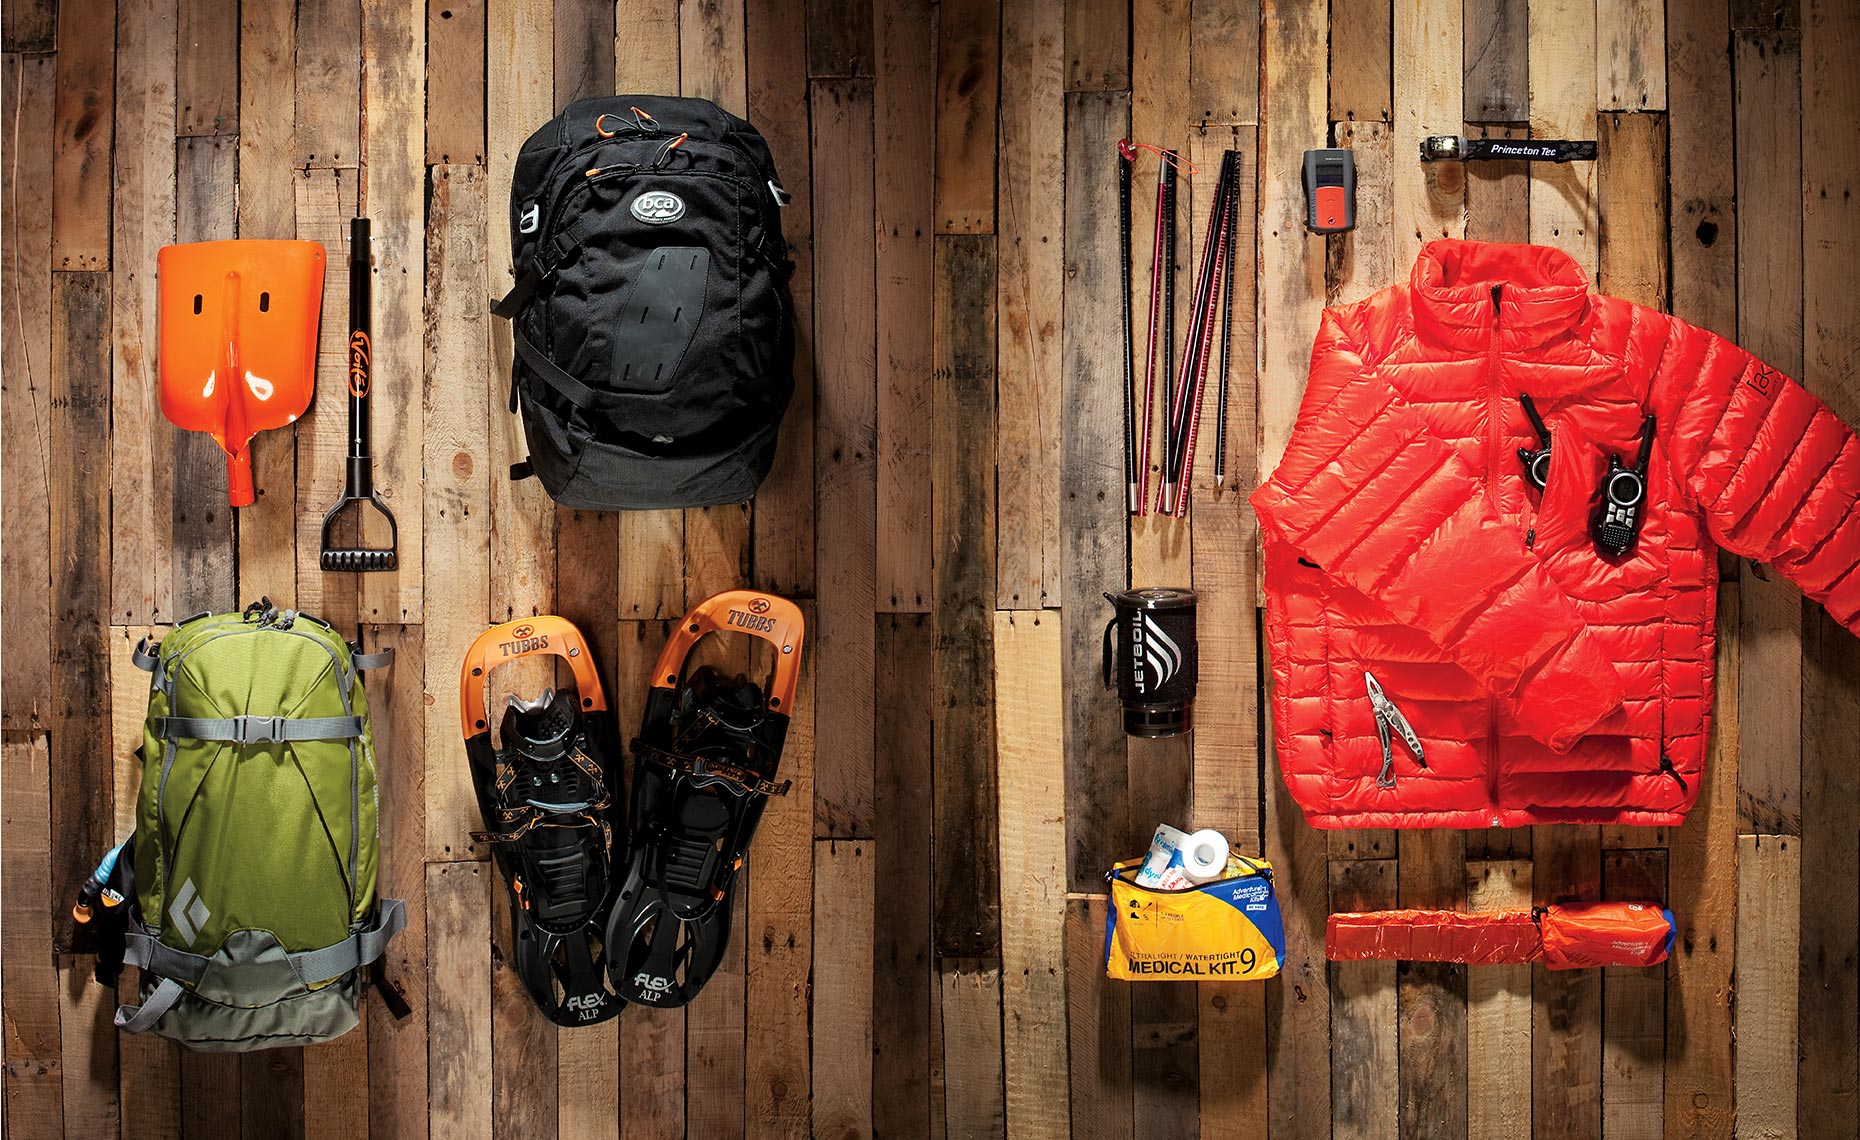 02_Backcountry_Snowboarding_Product_Chris_Wellhausen_Photography-DUP.JPG